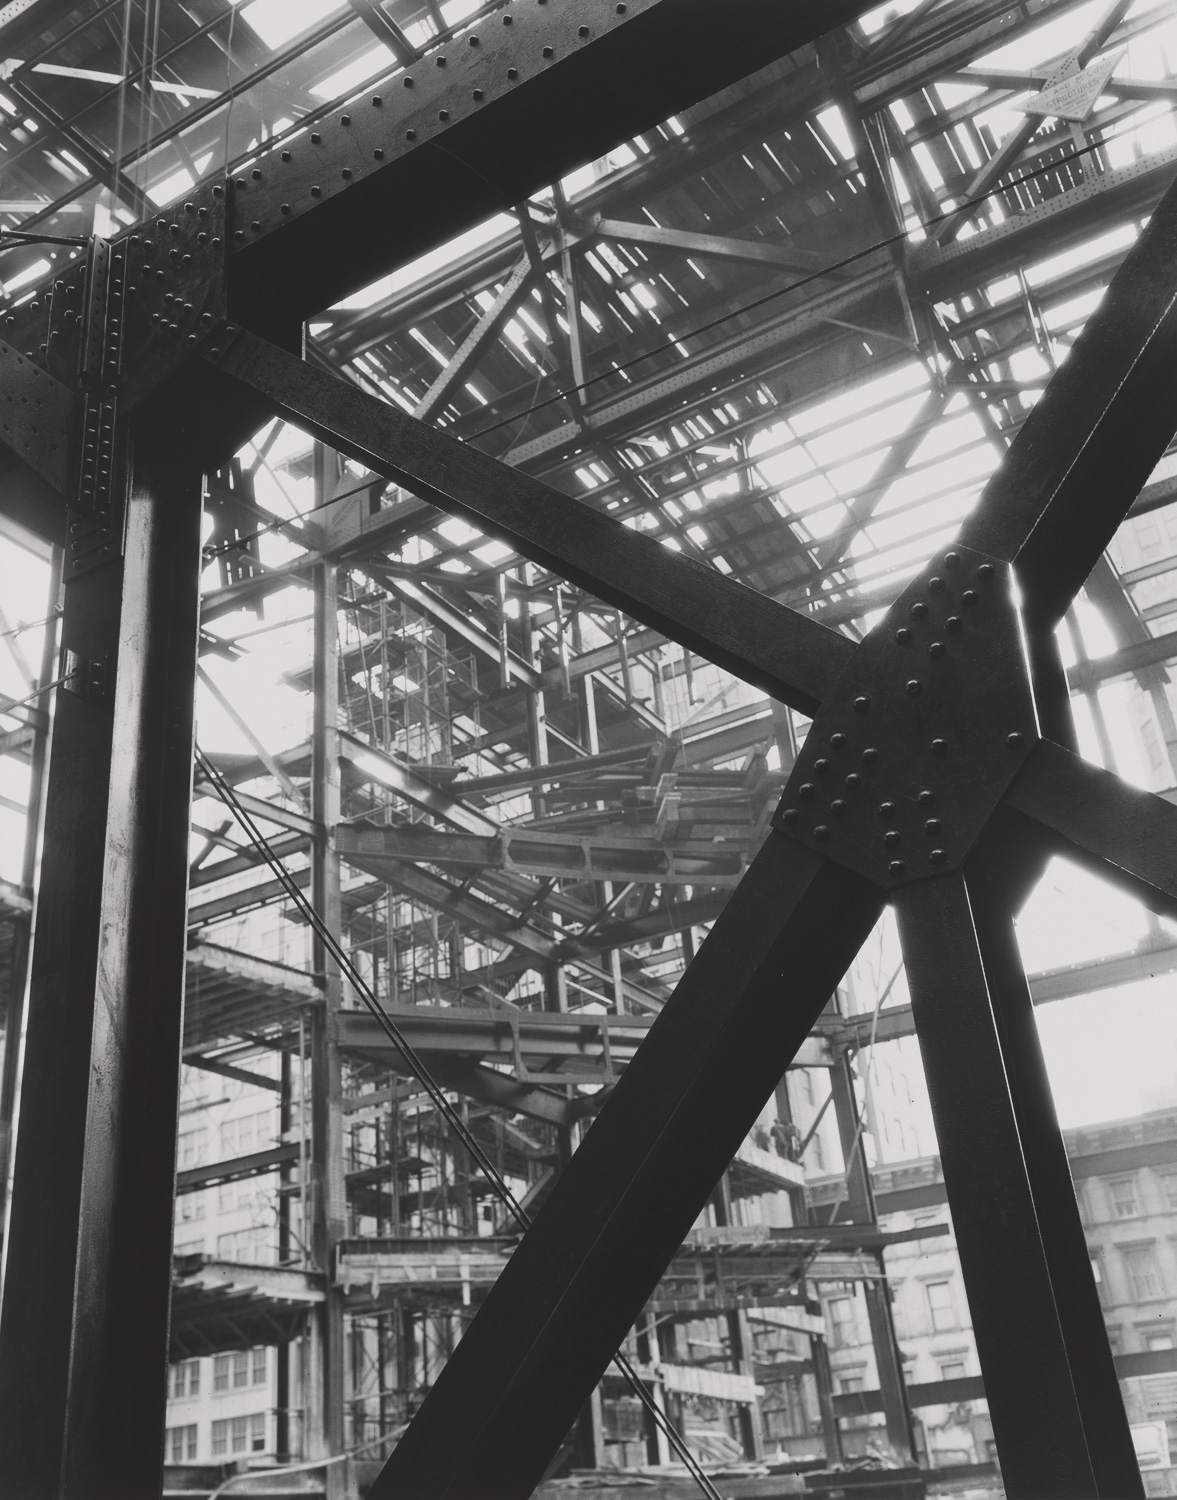 A black and white photograph of a portion of the unfinished building showing exposed steel beams. In the foreground are five beams that meet and are held together with rivets. More of the steel grid of the structure is visible in the background. Wooden planks connect areas of the construction site. Bright sunlight shines through and bleeds around the edges of the beams. A low row of older buildings is barely visible in the background.